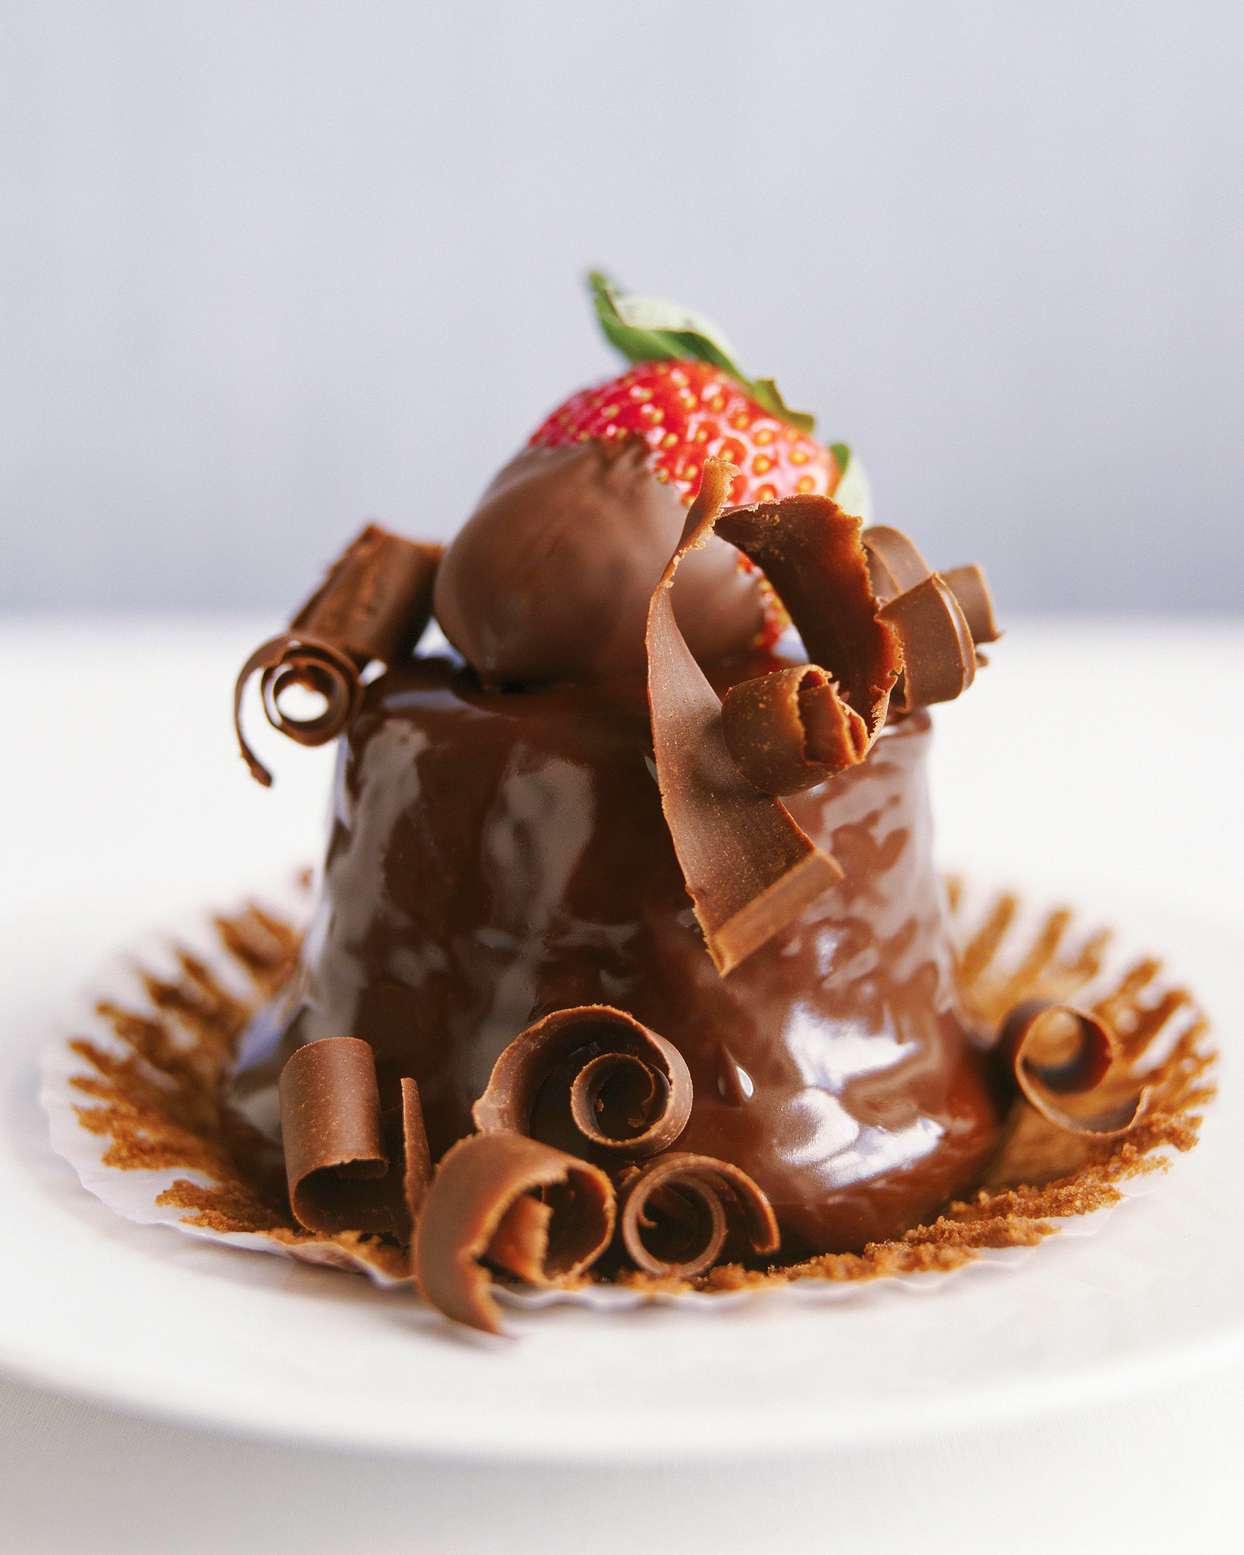 Chocolate-Covered Strawberry Cakes